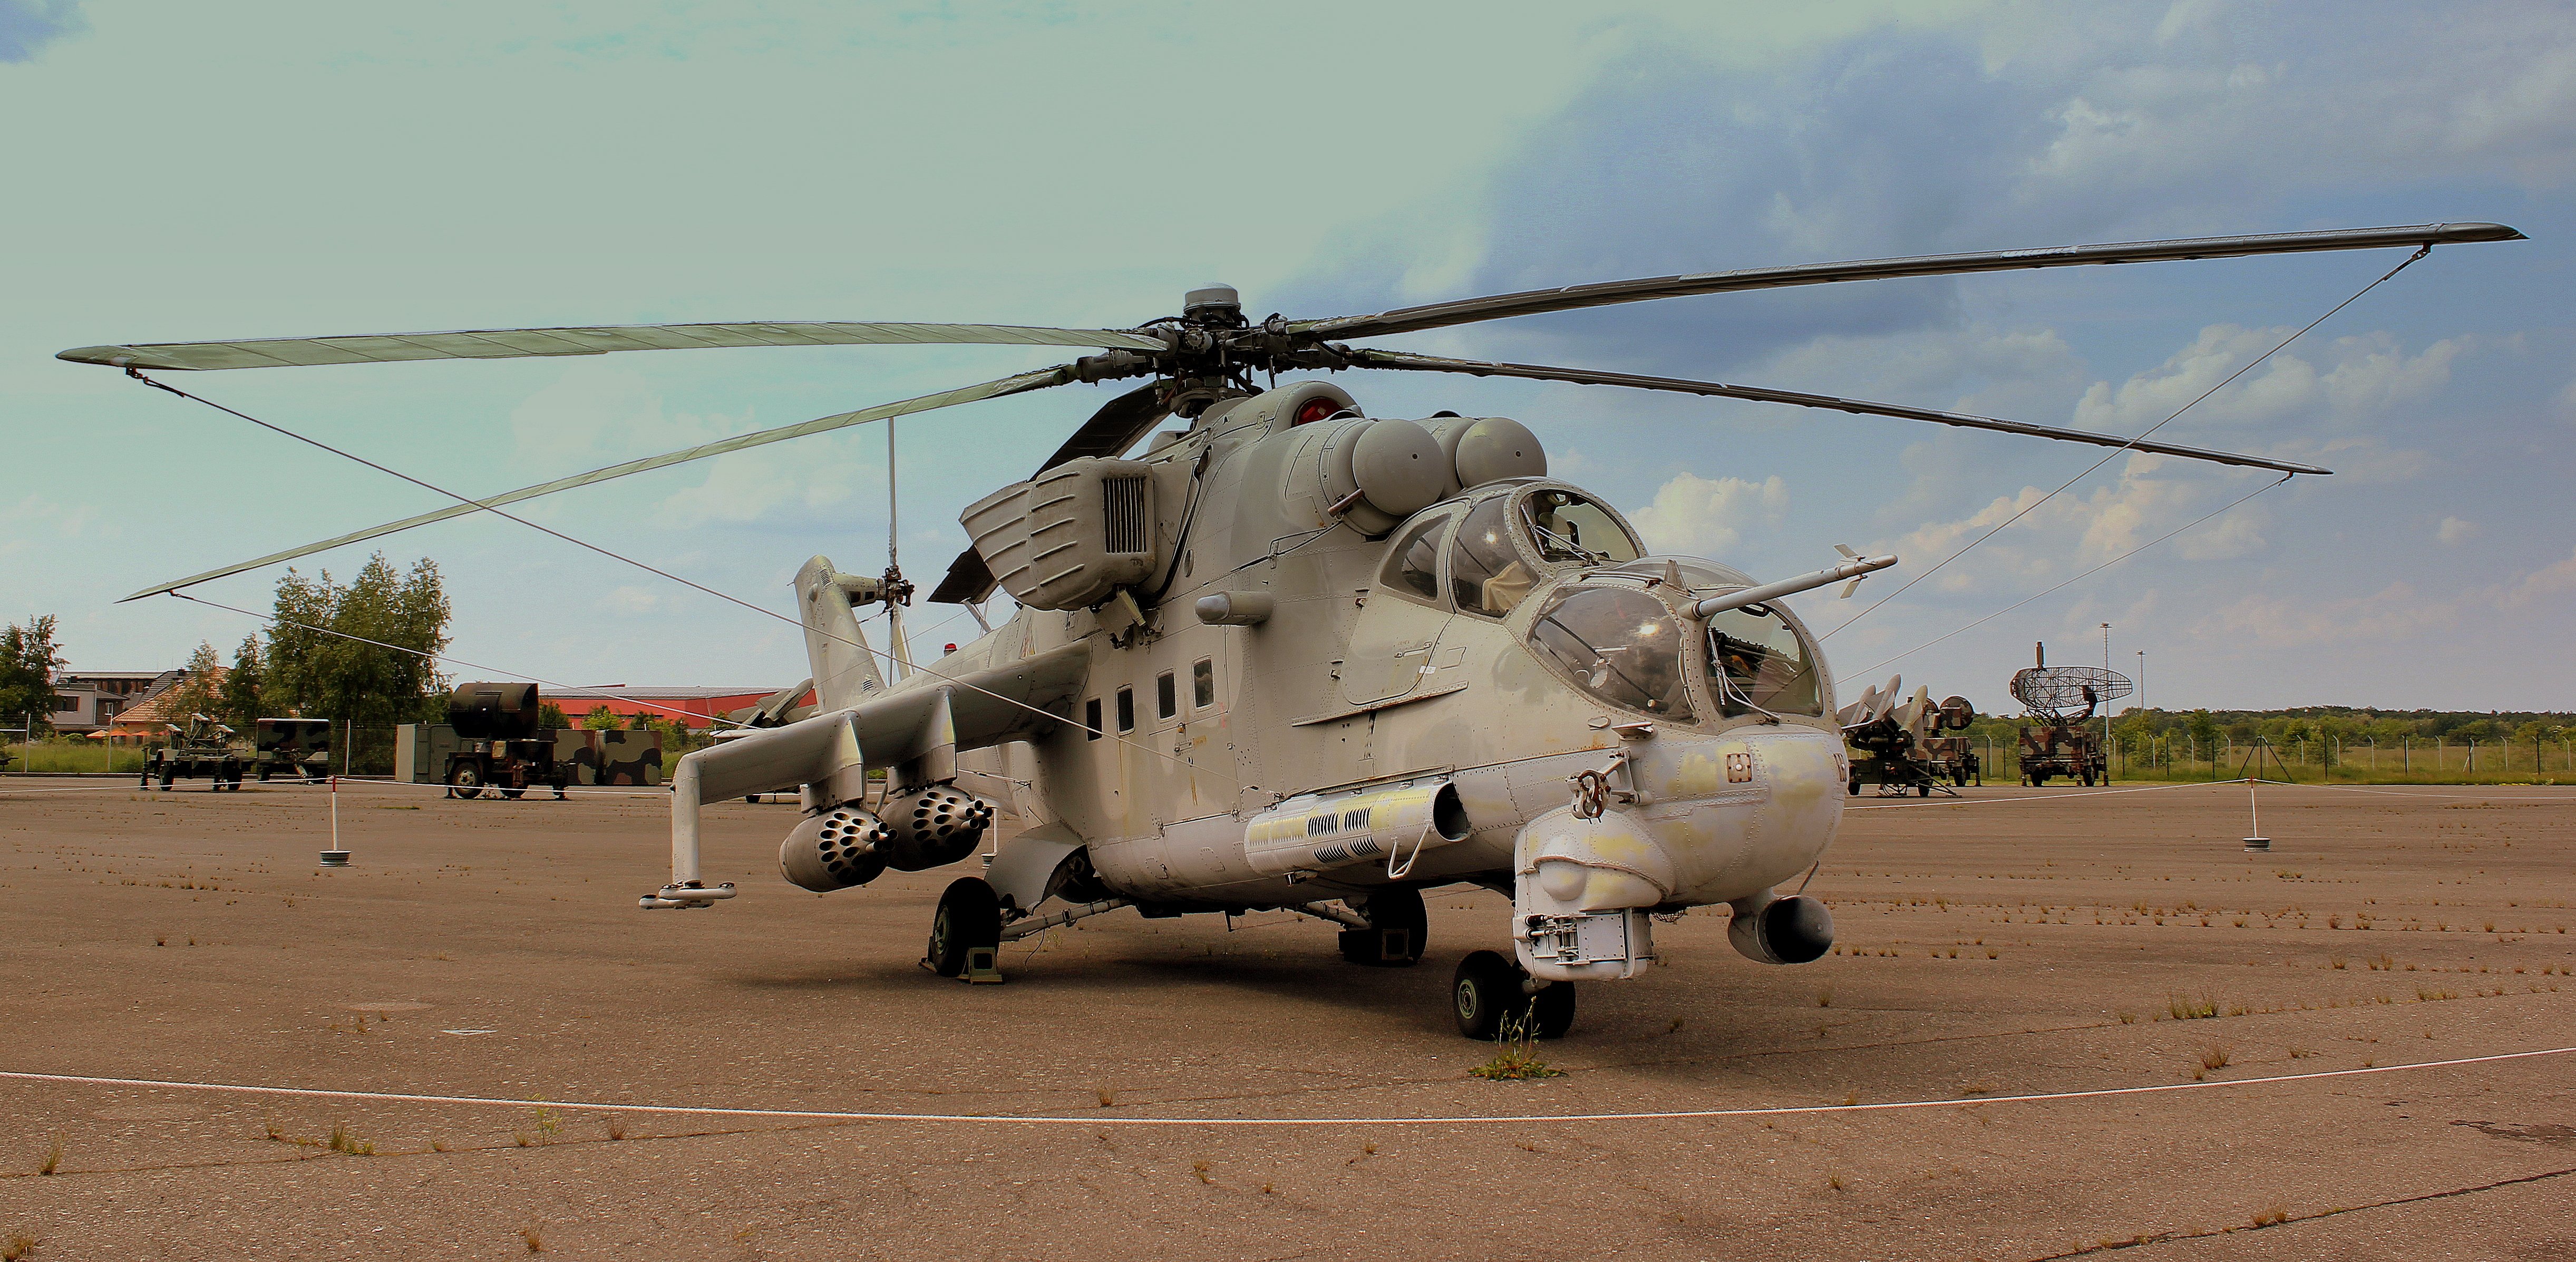 mi 24, Hind, Gunship, Russian, Russia, Military, Weapon, Helicopter, Aircraft,  33 Wallpaper